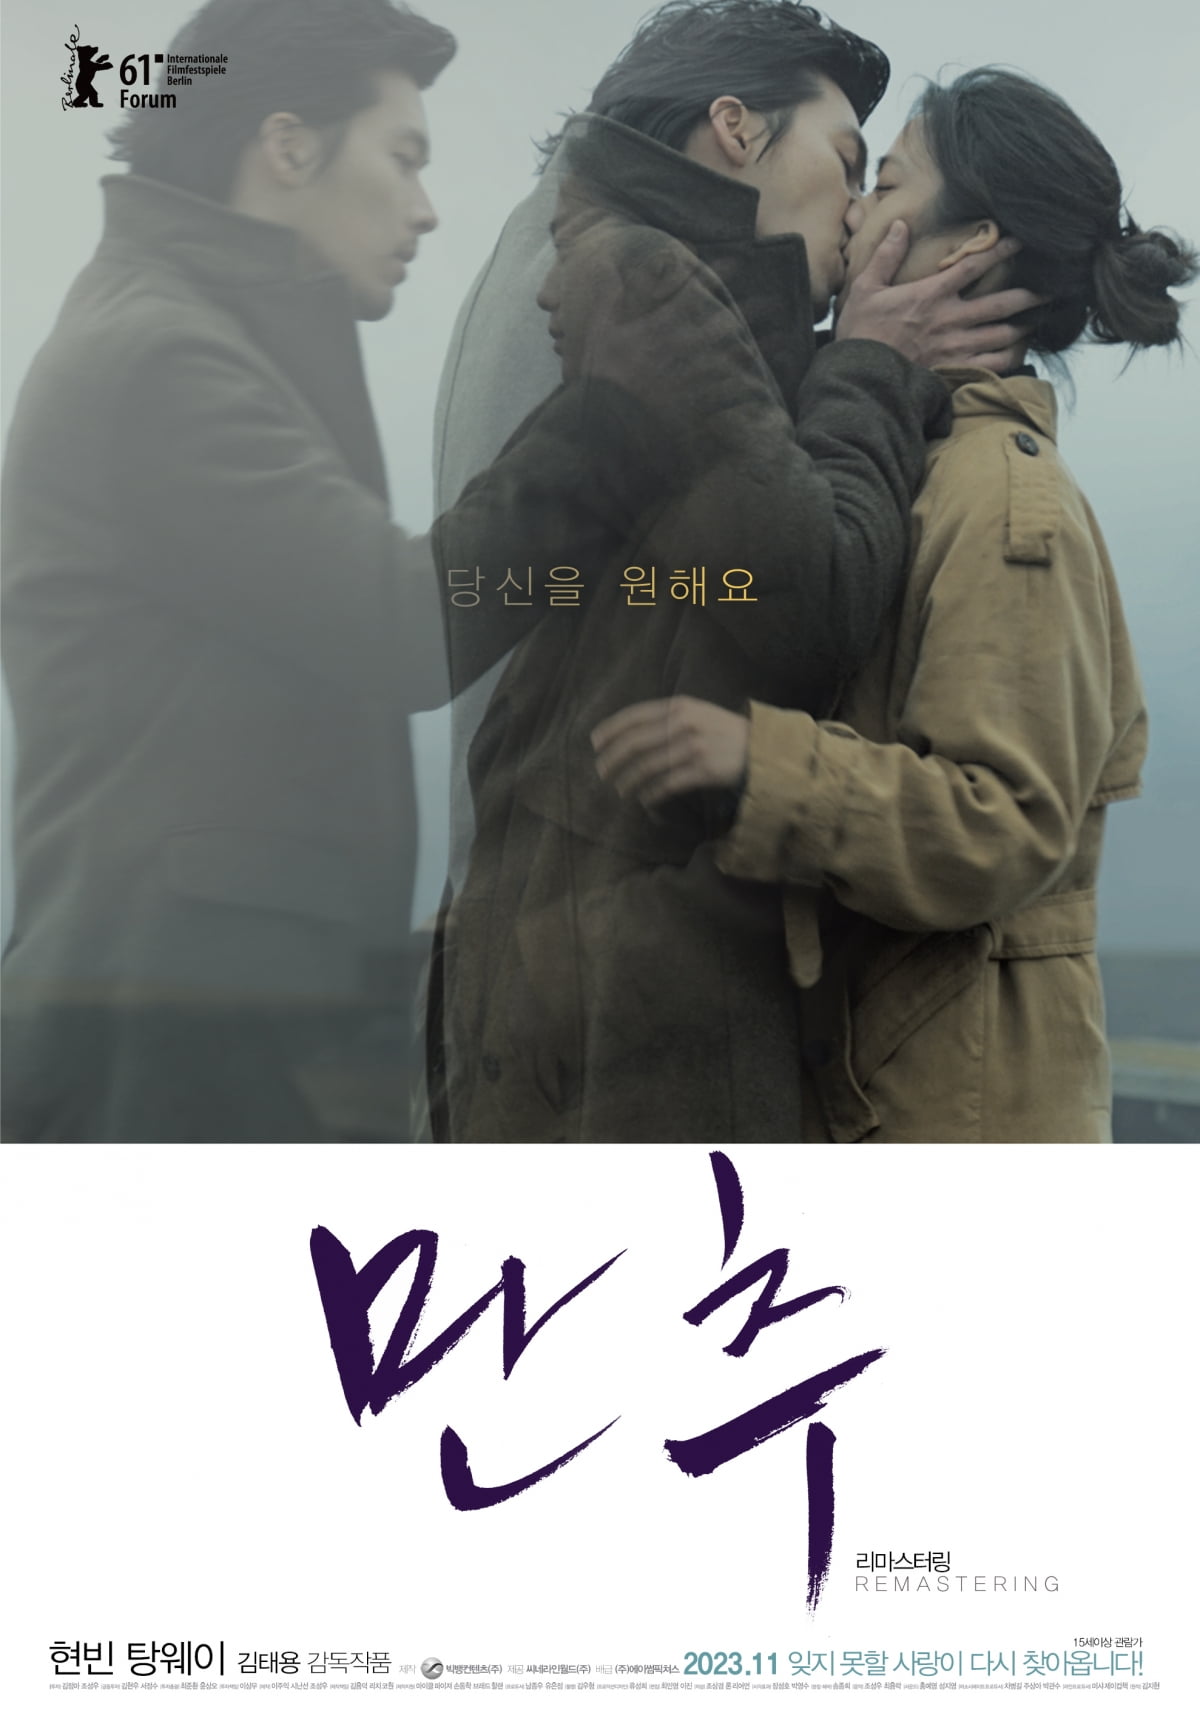 Director Kim Tae-yong reveals the secret of the fog in ‘Late Autumn’ for the first time in 12 years